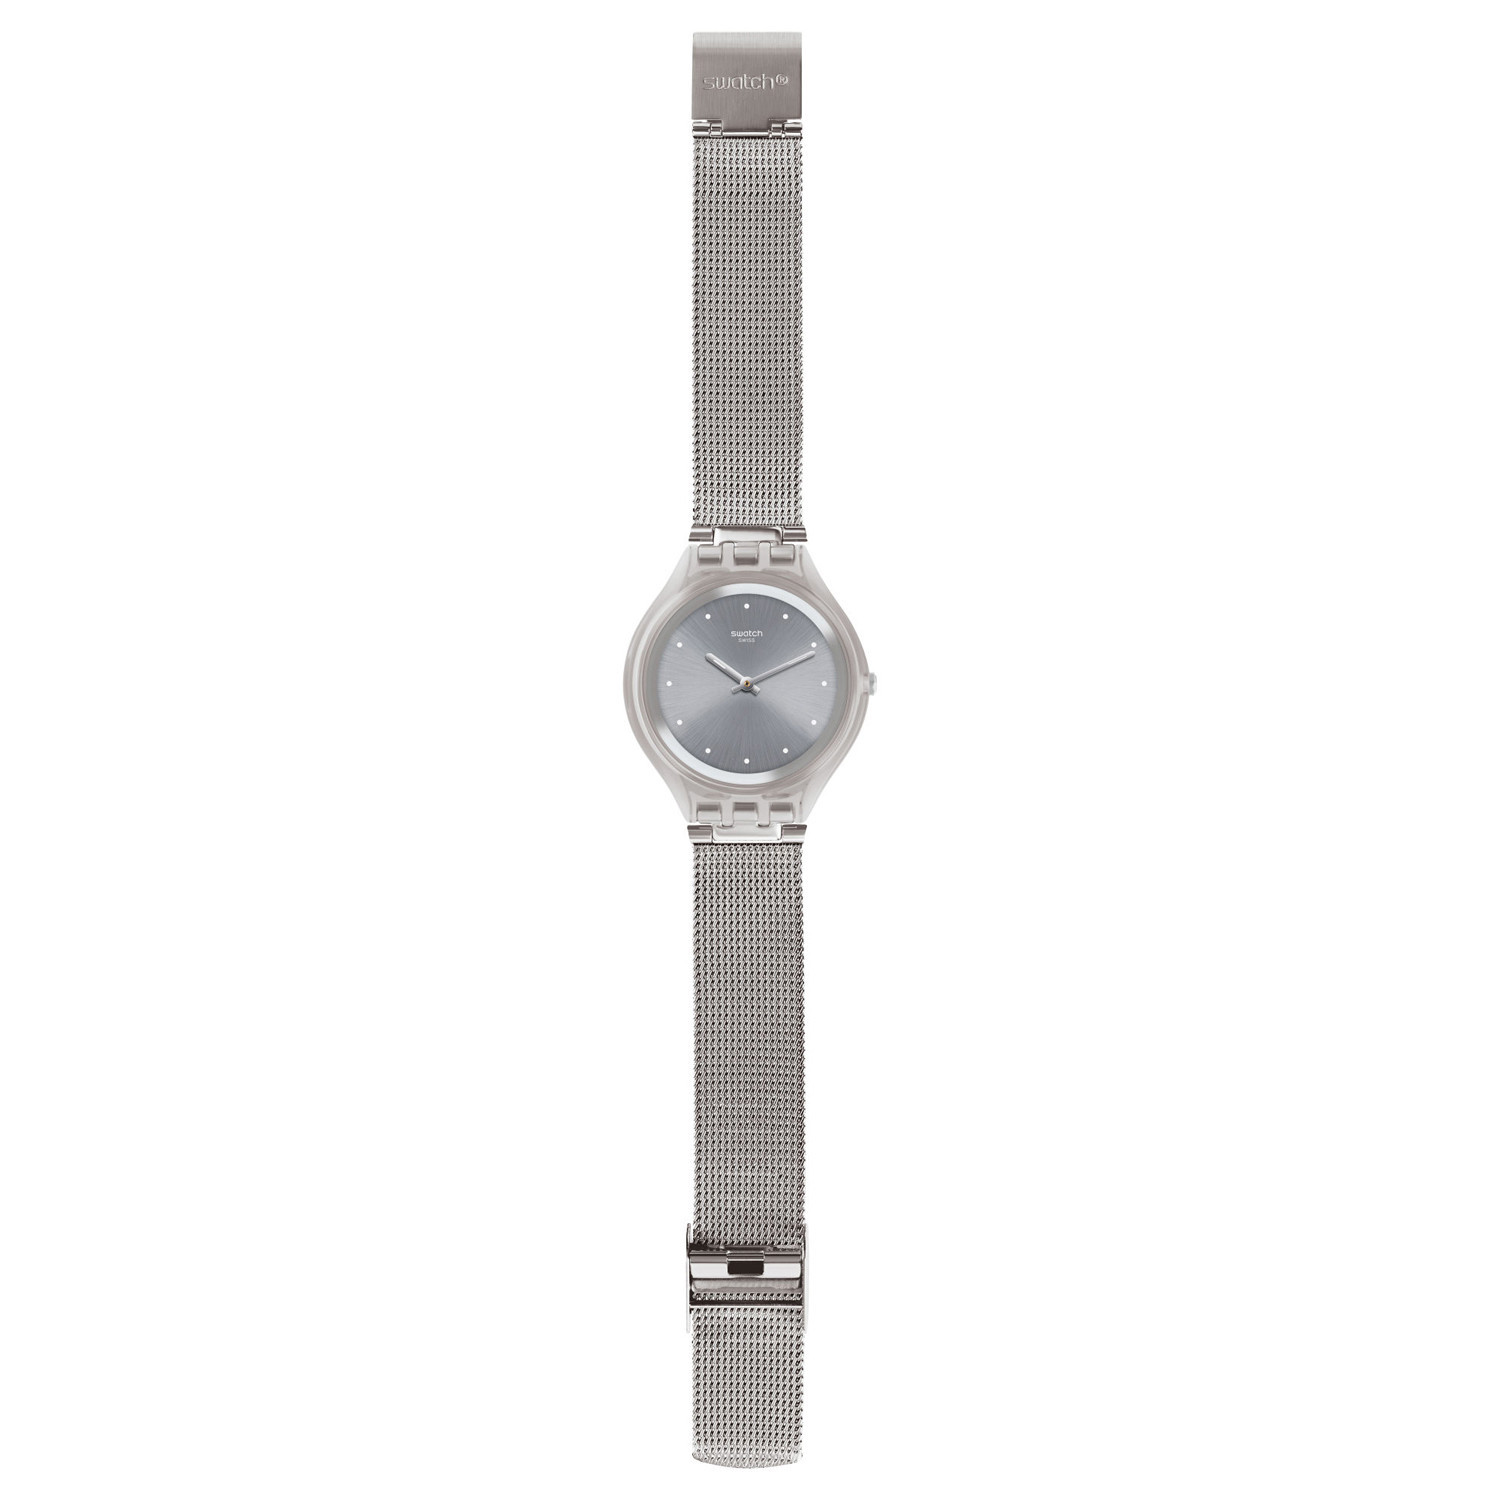 Montre femme Swatch Skinsparkly
collection Skin